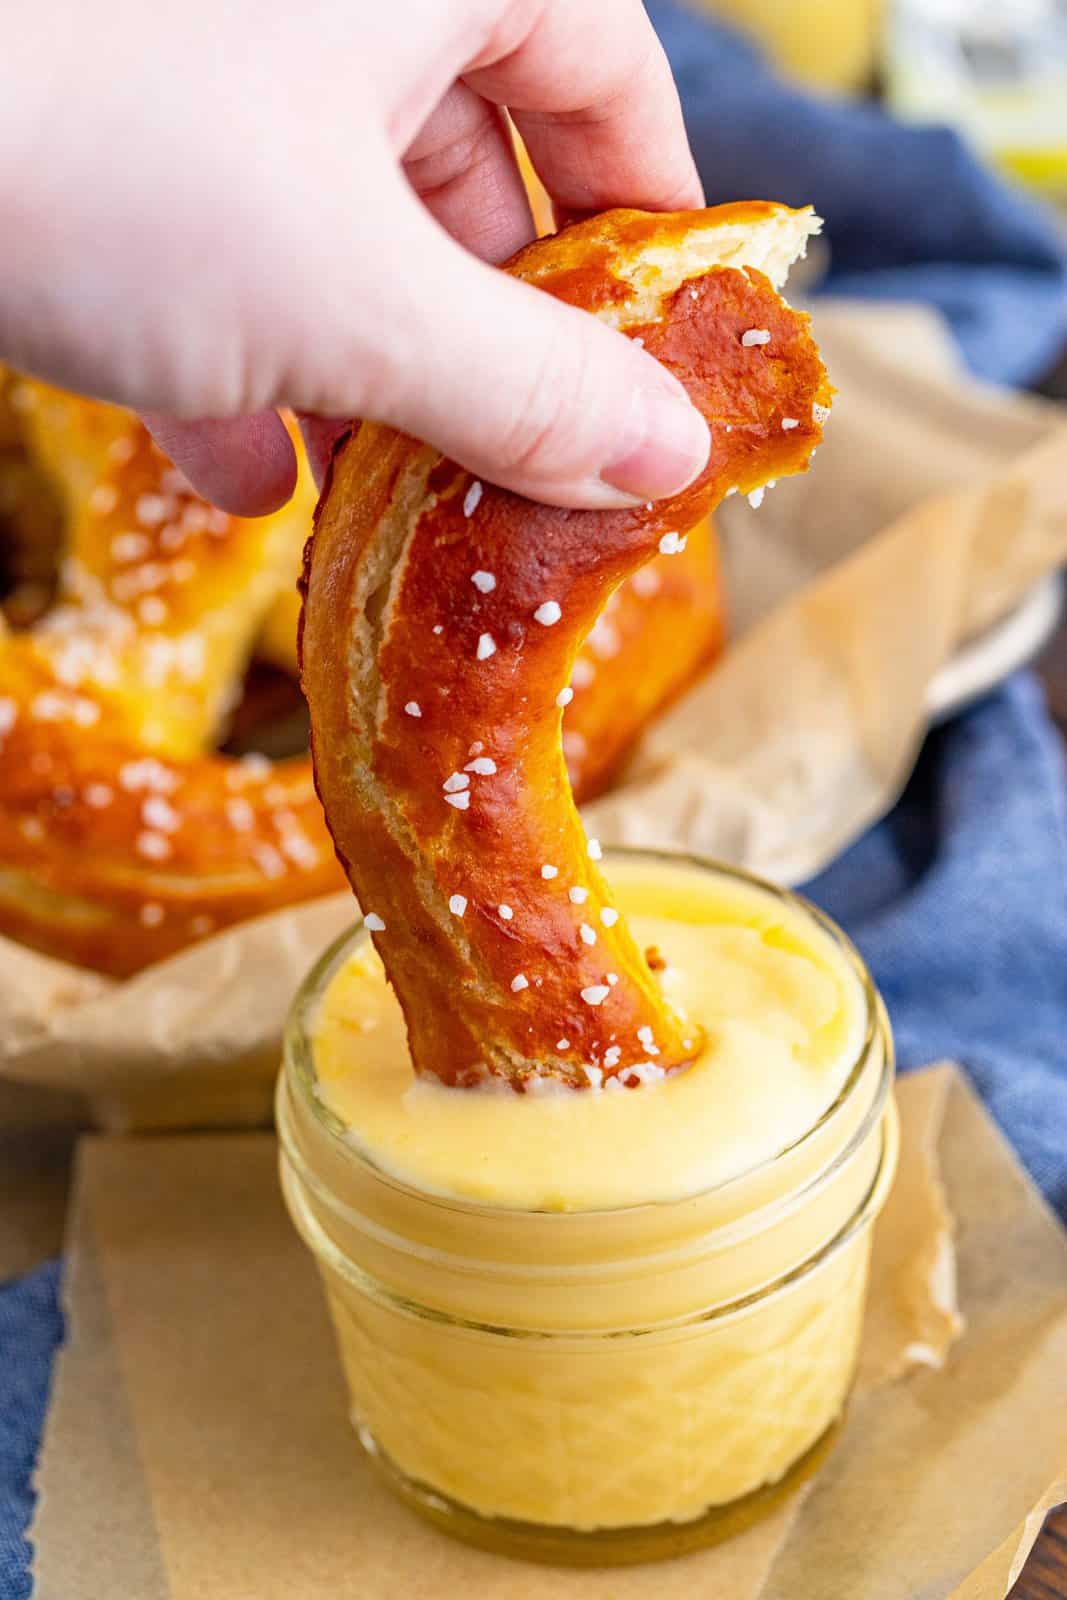 Hand dipping part of Homemade Soft Pretzels into cheese sauce.